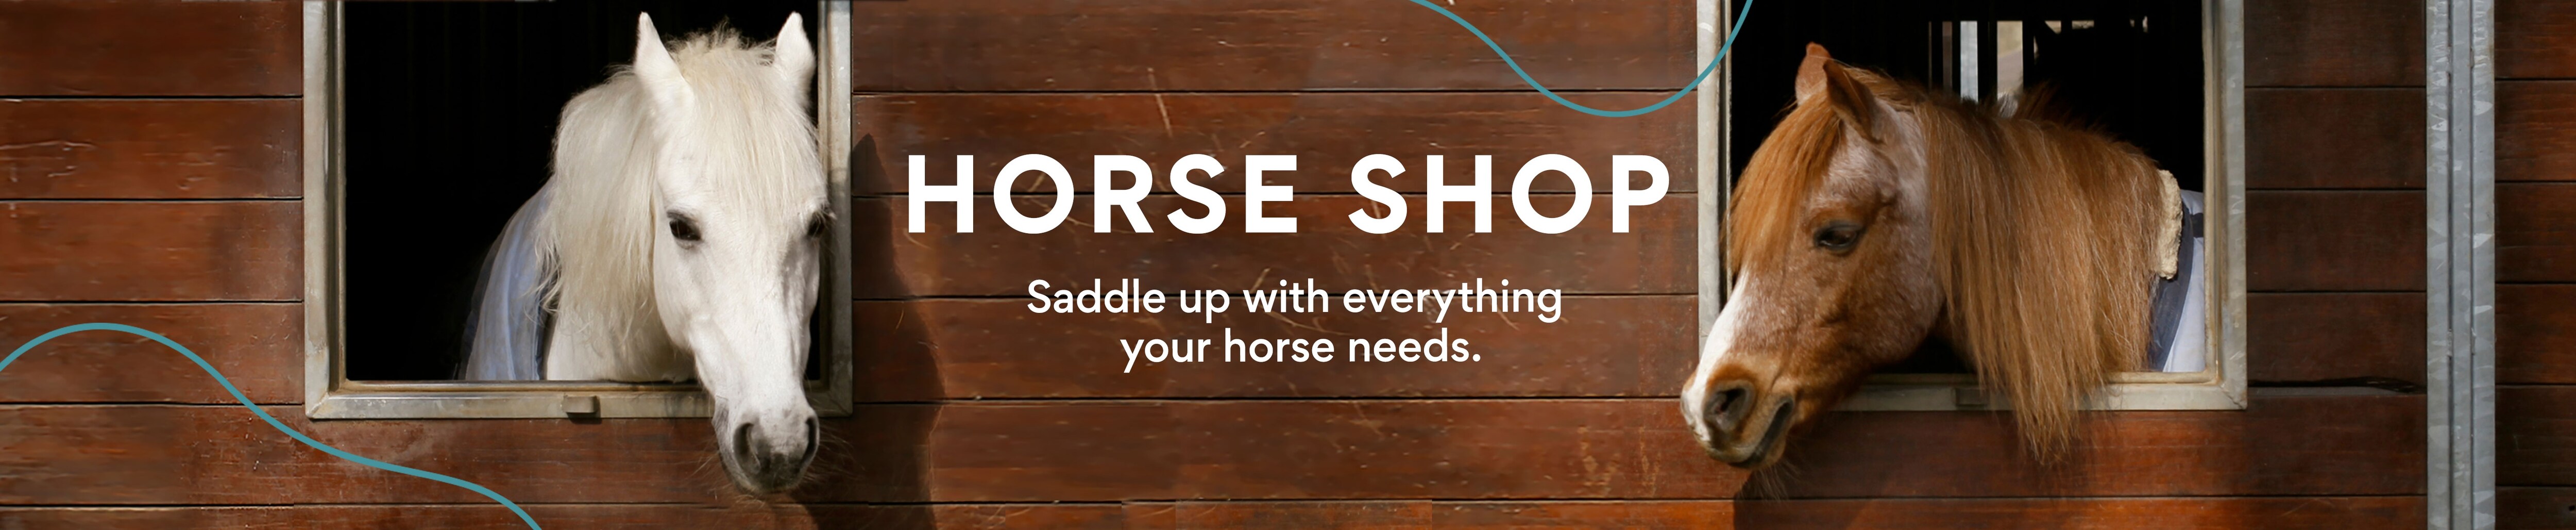 Horse Shop. Saddle up with everything your horse needs